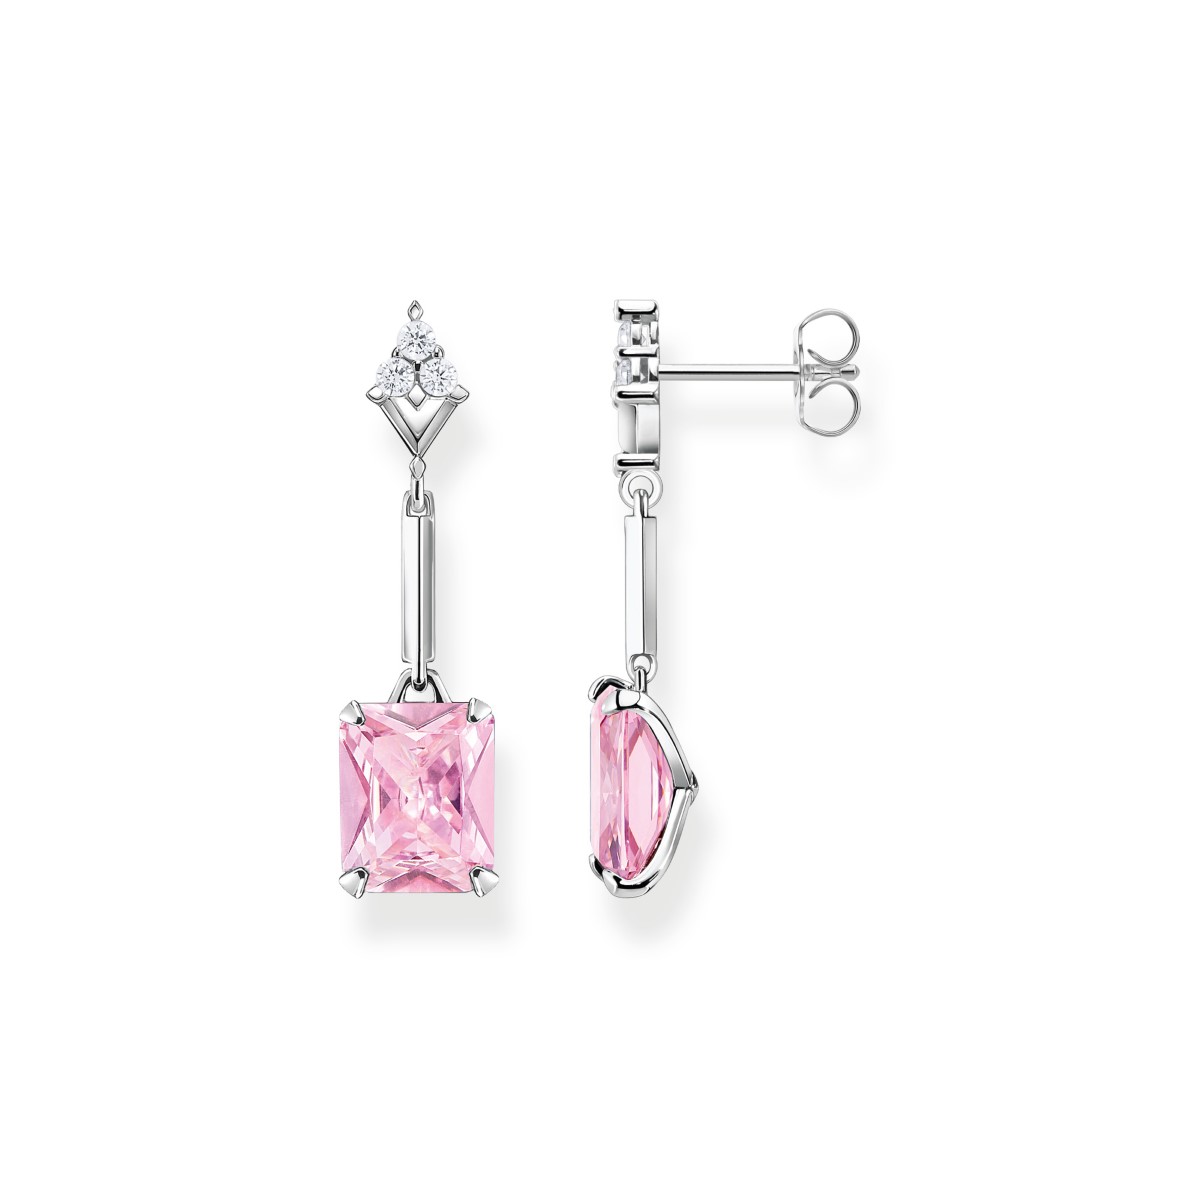 Thomas Sabo Pink Octagon Cut and White Zirconia Drop Earrings H2177-051-9